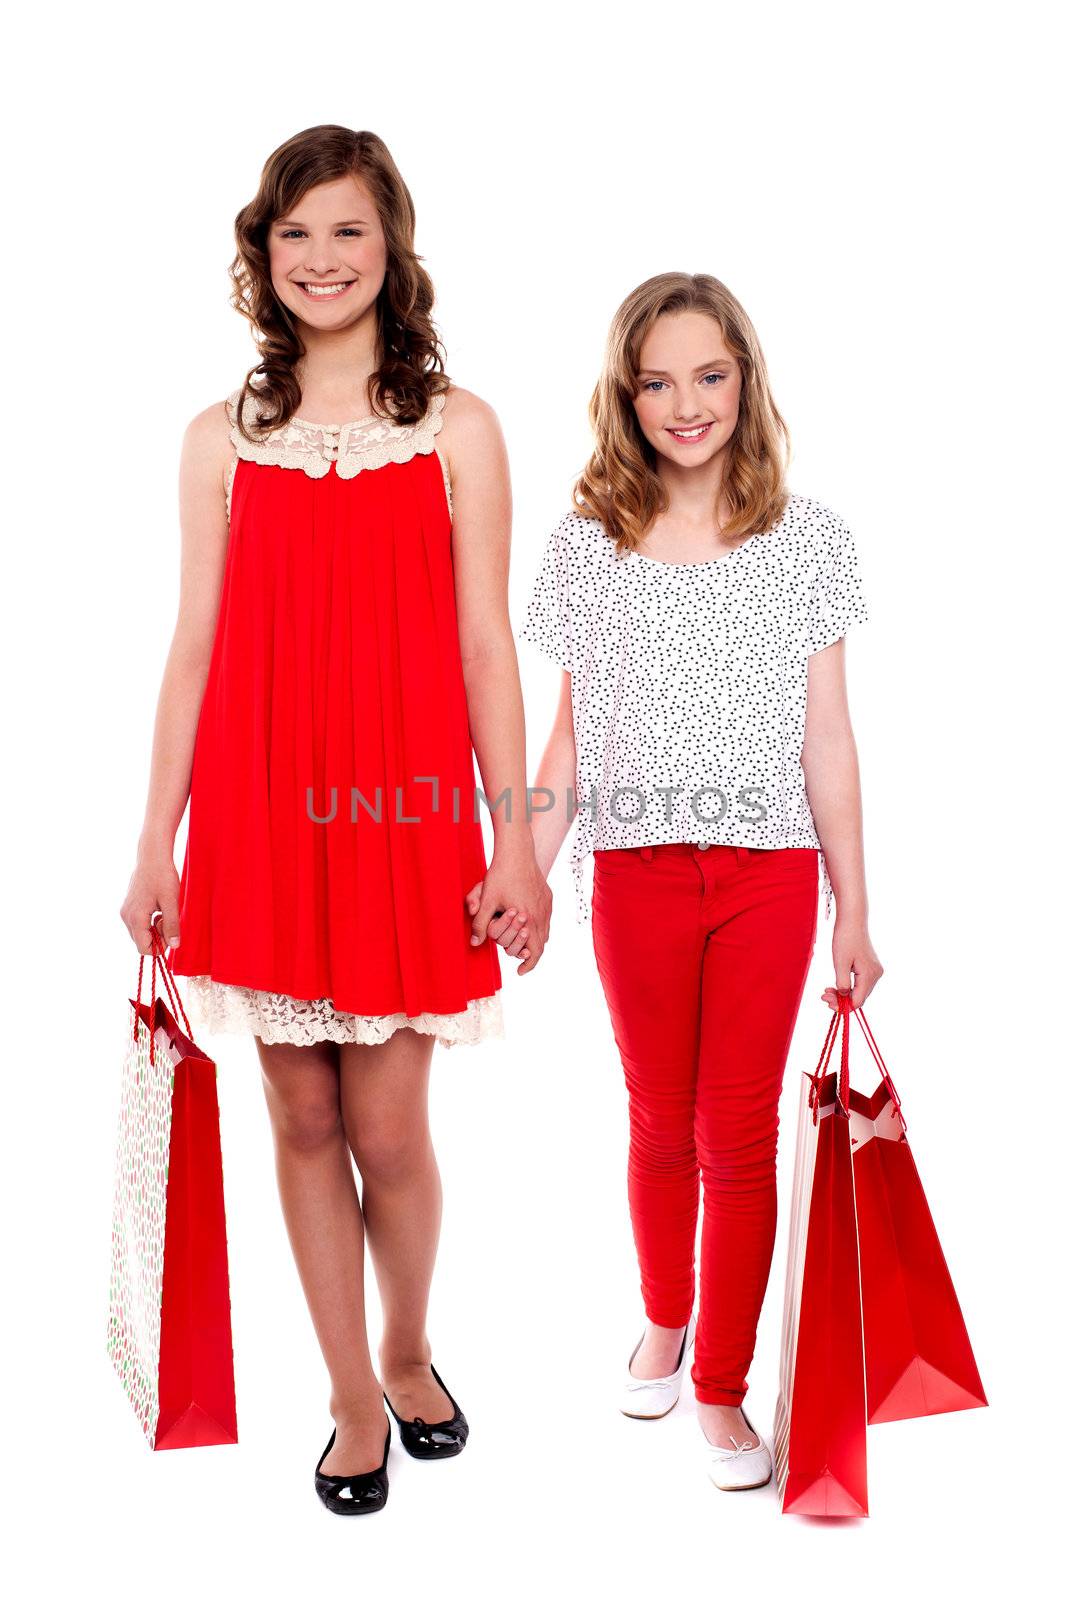 Glamorous girls walking after purchases by stockyimages